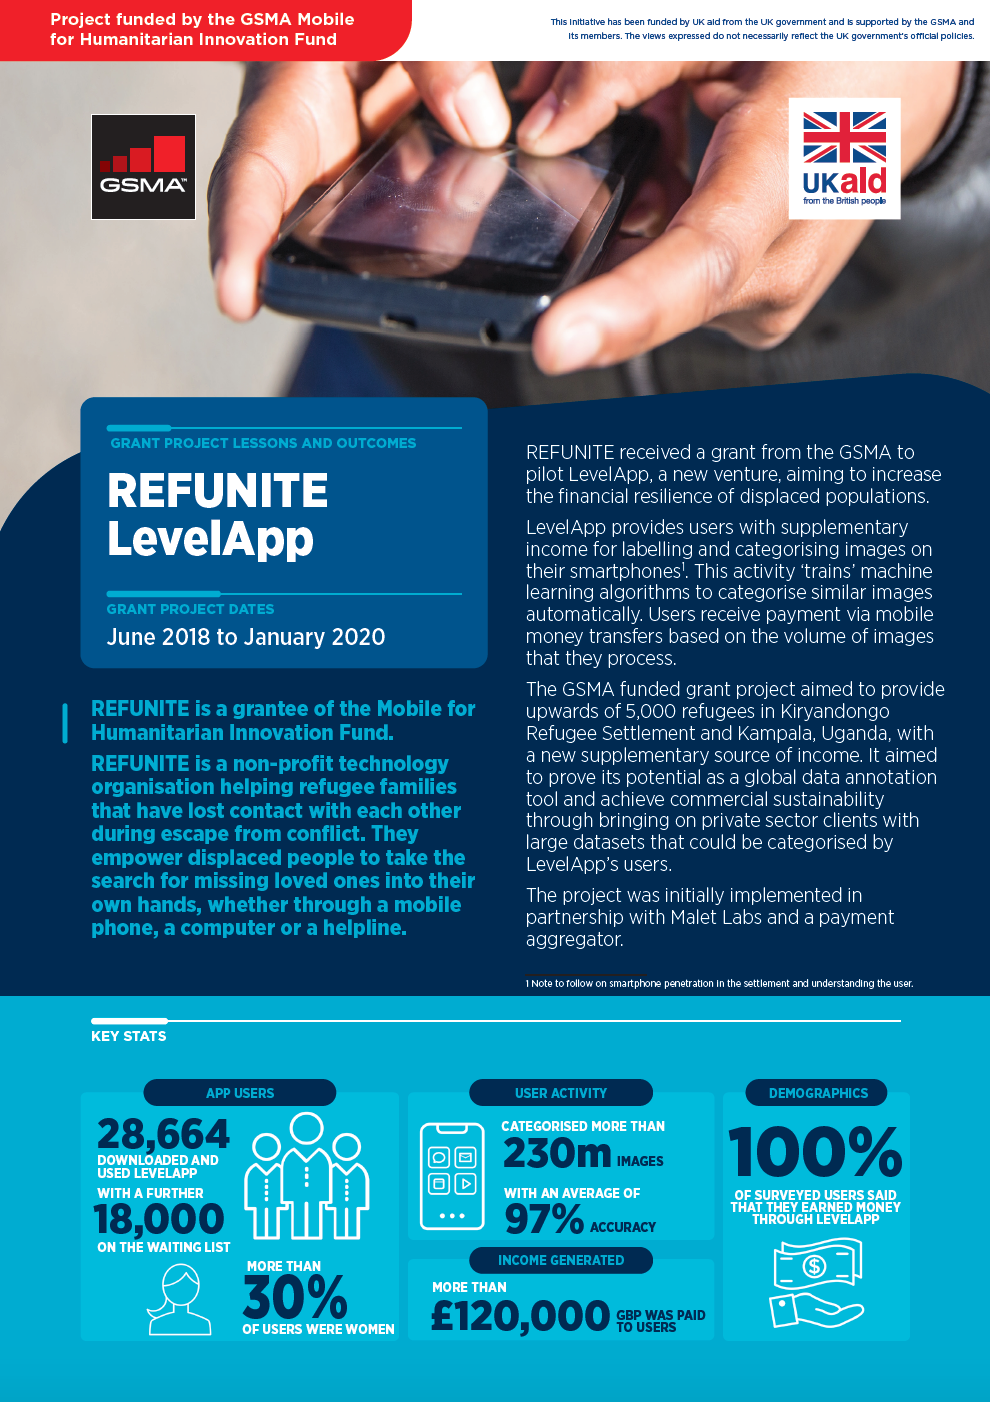 M4H Innovation Fund lessons and outcomes: REFUNITE LevelApp image